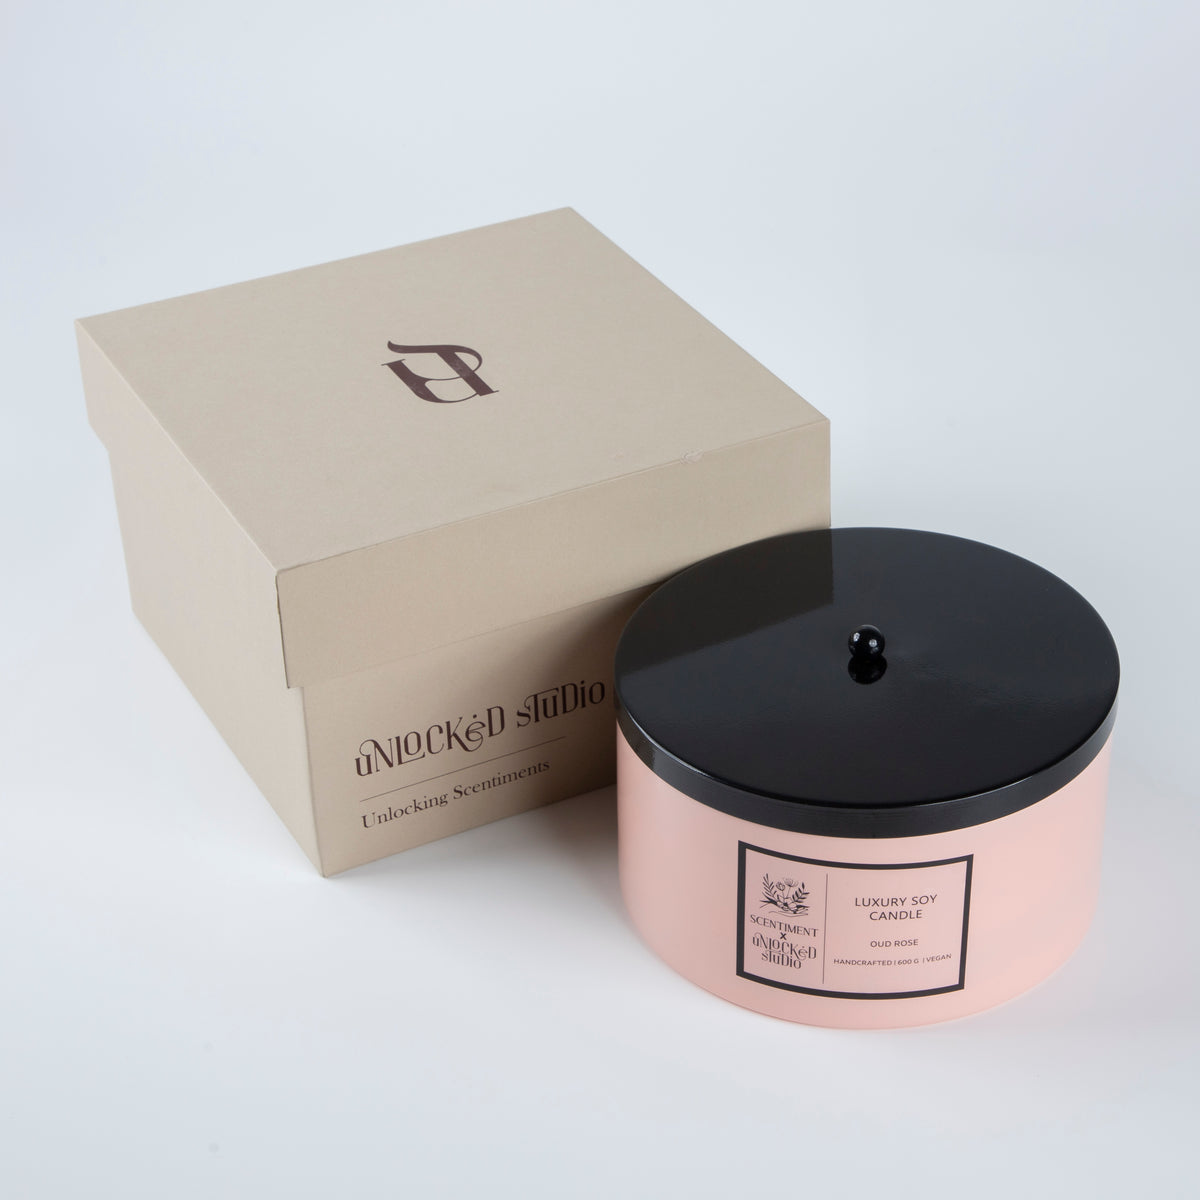 Soy Wax Medium Candle - Oud & Rose